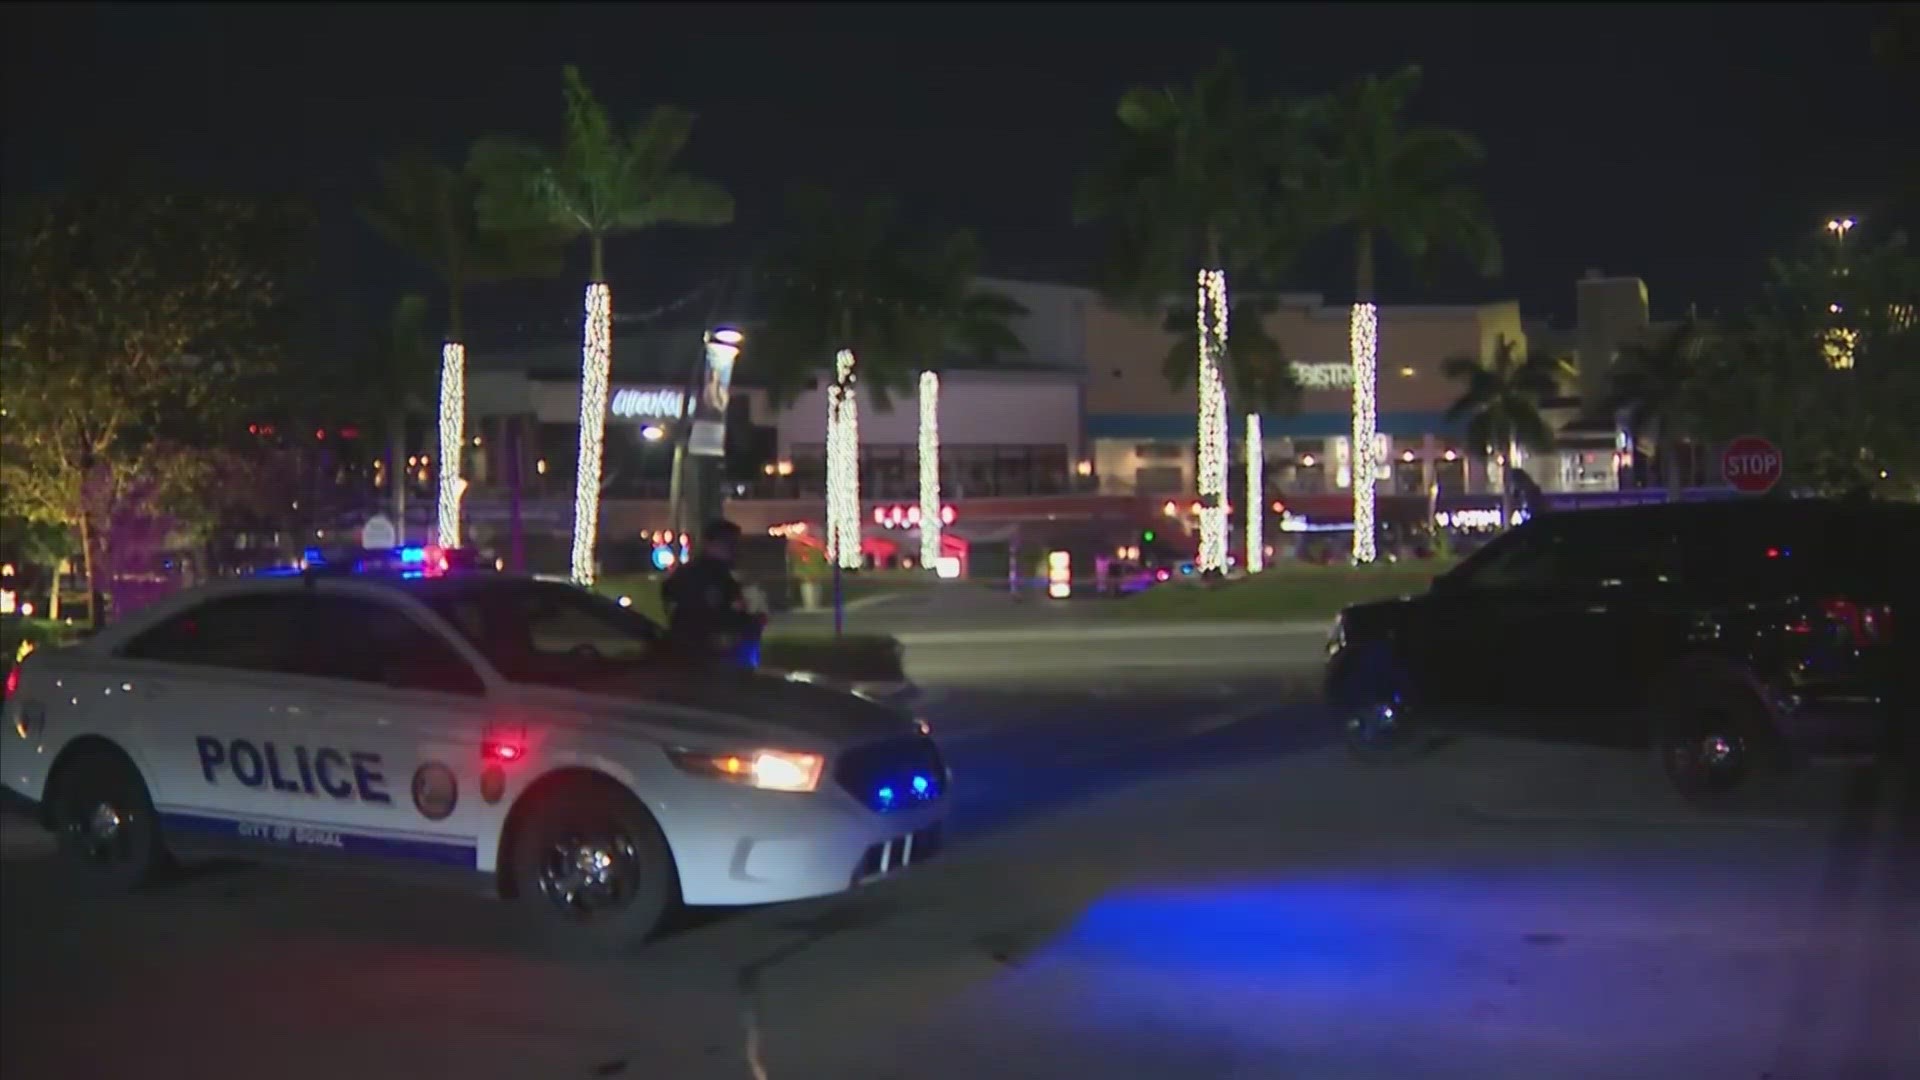 The shooting happened early Saturday morning in Doral.